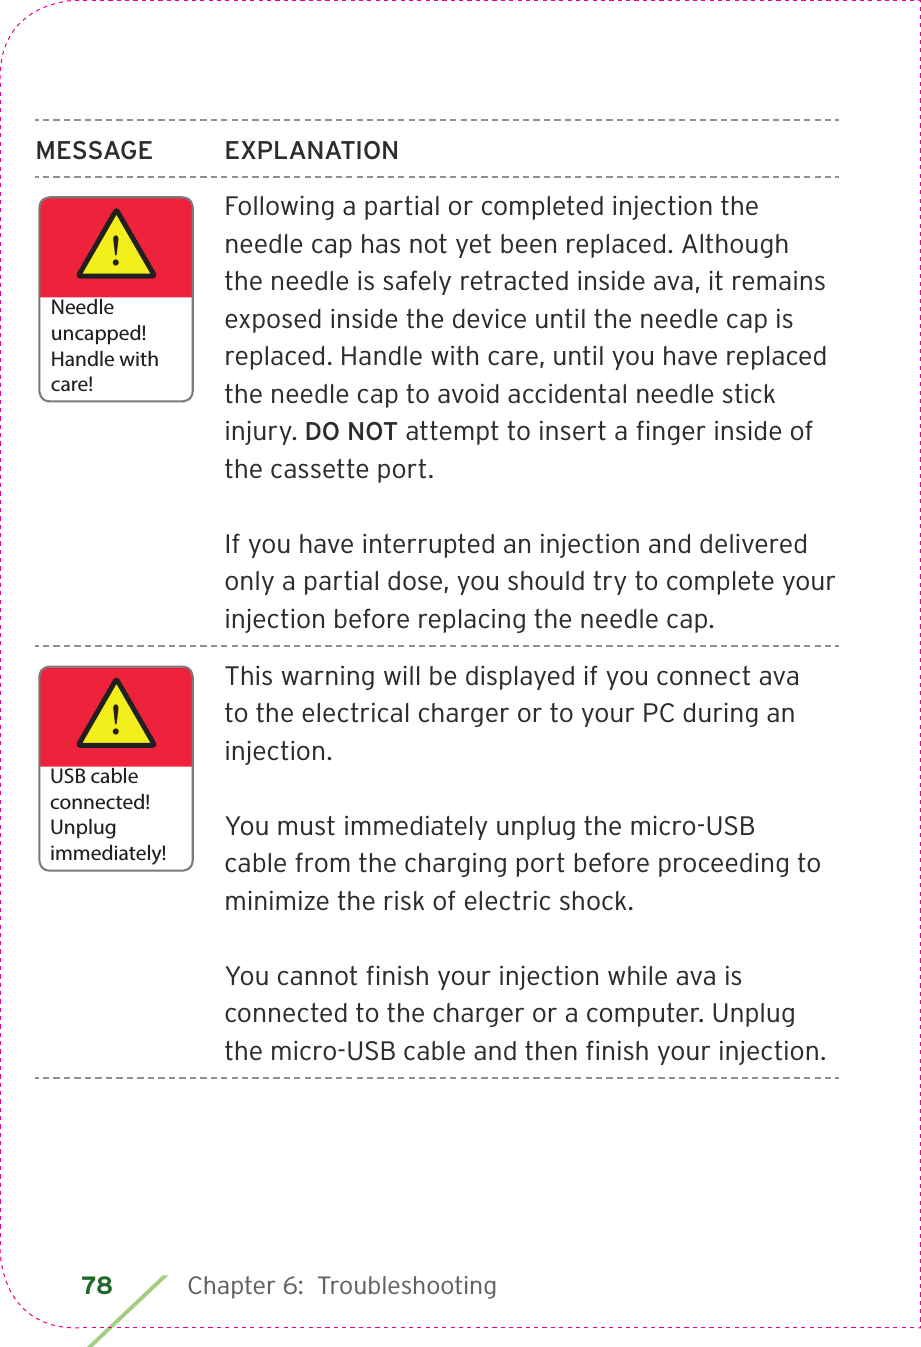 78 Chapter 6:  Troubleshooting MESSAGE EXPLANATIONFollowing a partial or completed injection the needle cap has not yet been replaced. Although the needle is safely retracted inside ava, it remains exposed inside the device until the needle cap is replaced. Handle with care, until you have replaced the needle cap to avoid accidental needle stick injury. DO NOT attempt to insert a ﬁnger inside of the cassette port.If you have interrupted an injection and delivered only a partial dose, you should try to complete your injection before replacing the needle cap. This warning will be displayed if you connect ava to the electrical charger or to your PC during an injection. You must immediately unplug the micro-USB cable from the charging port before proceeding to minimize the risk of electric shock. You cannot ﬁnish your injection while ava is connected to the charger or a computer. Unplug the micro-USB cable and then ﬁnish your injection. !Needleuncapped!Handle with care!!USB cableconnected!Unplug immediately!